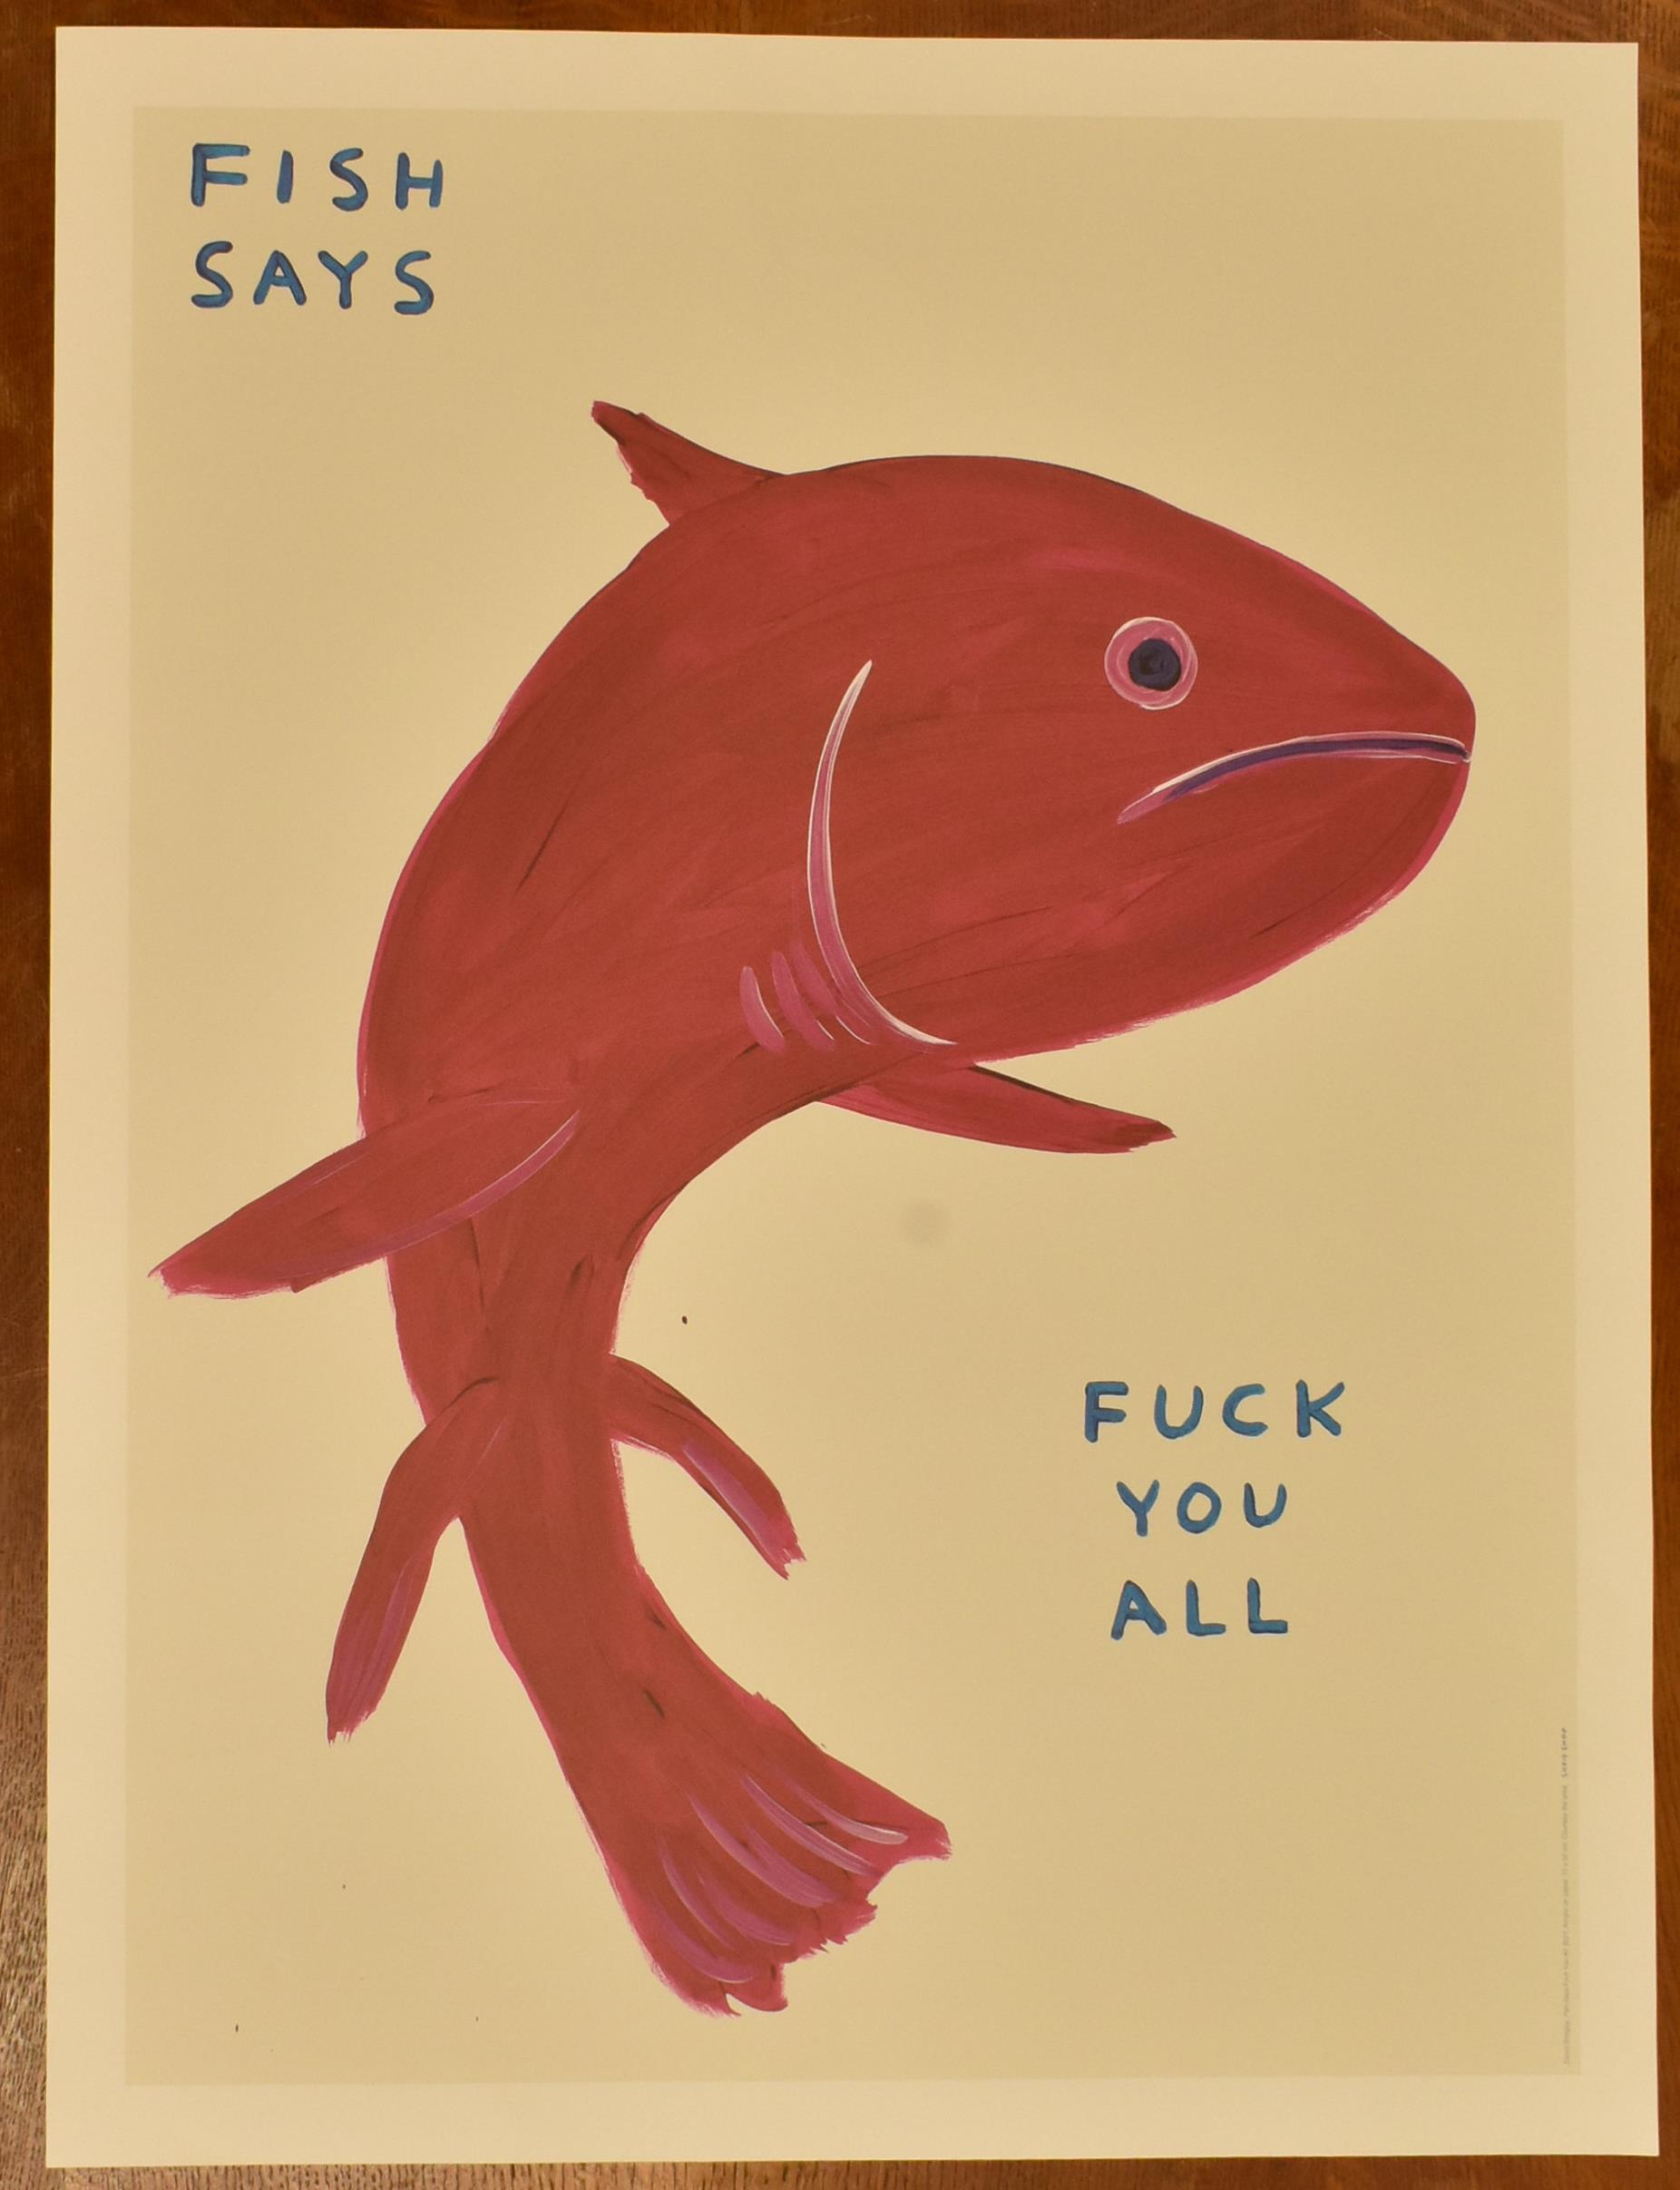 DAVID SHRIGLEY - FISH SAYS "FU*K YOU ALL" - LITHOGRAPH ON PAPER